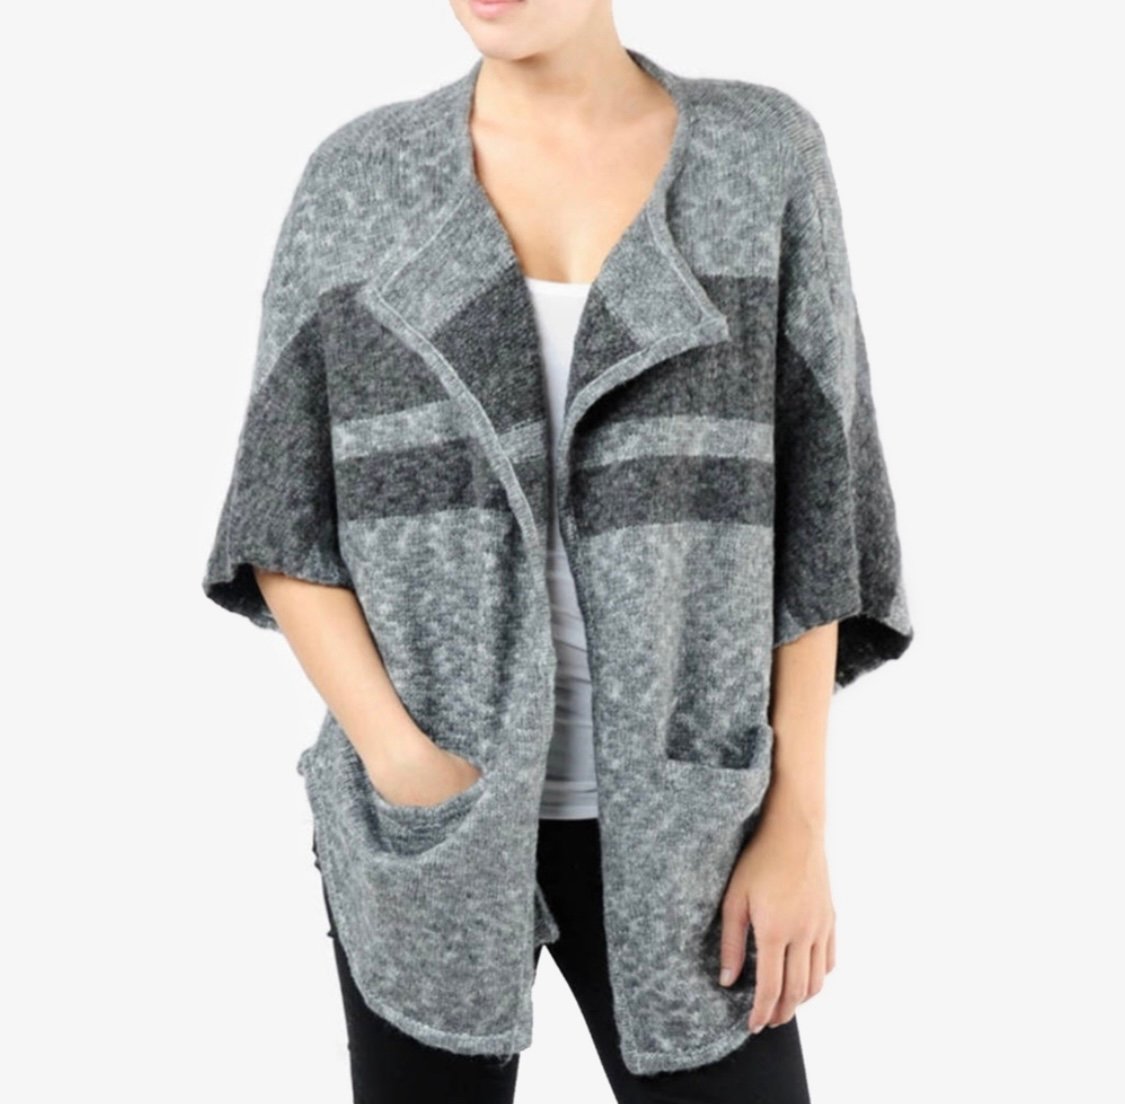 The Best Seller James Perse Open Front Gray Cardigan Me